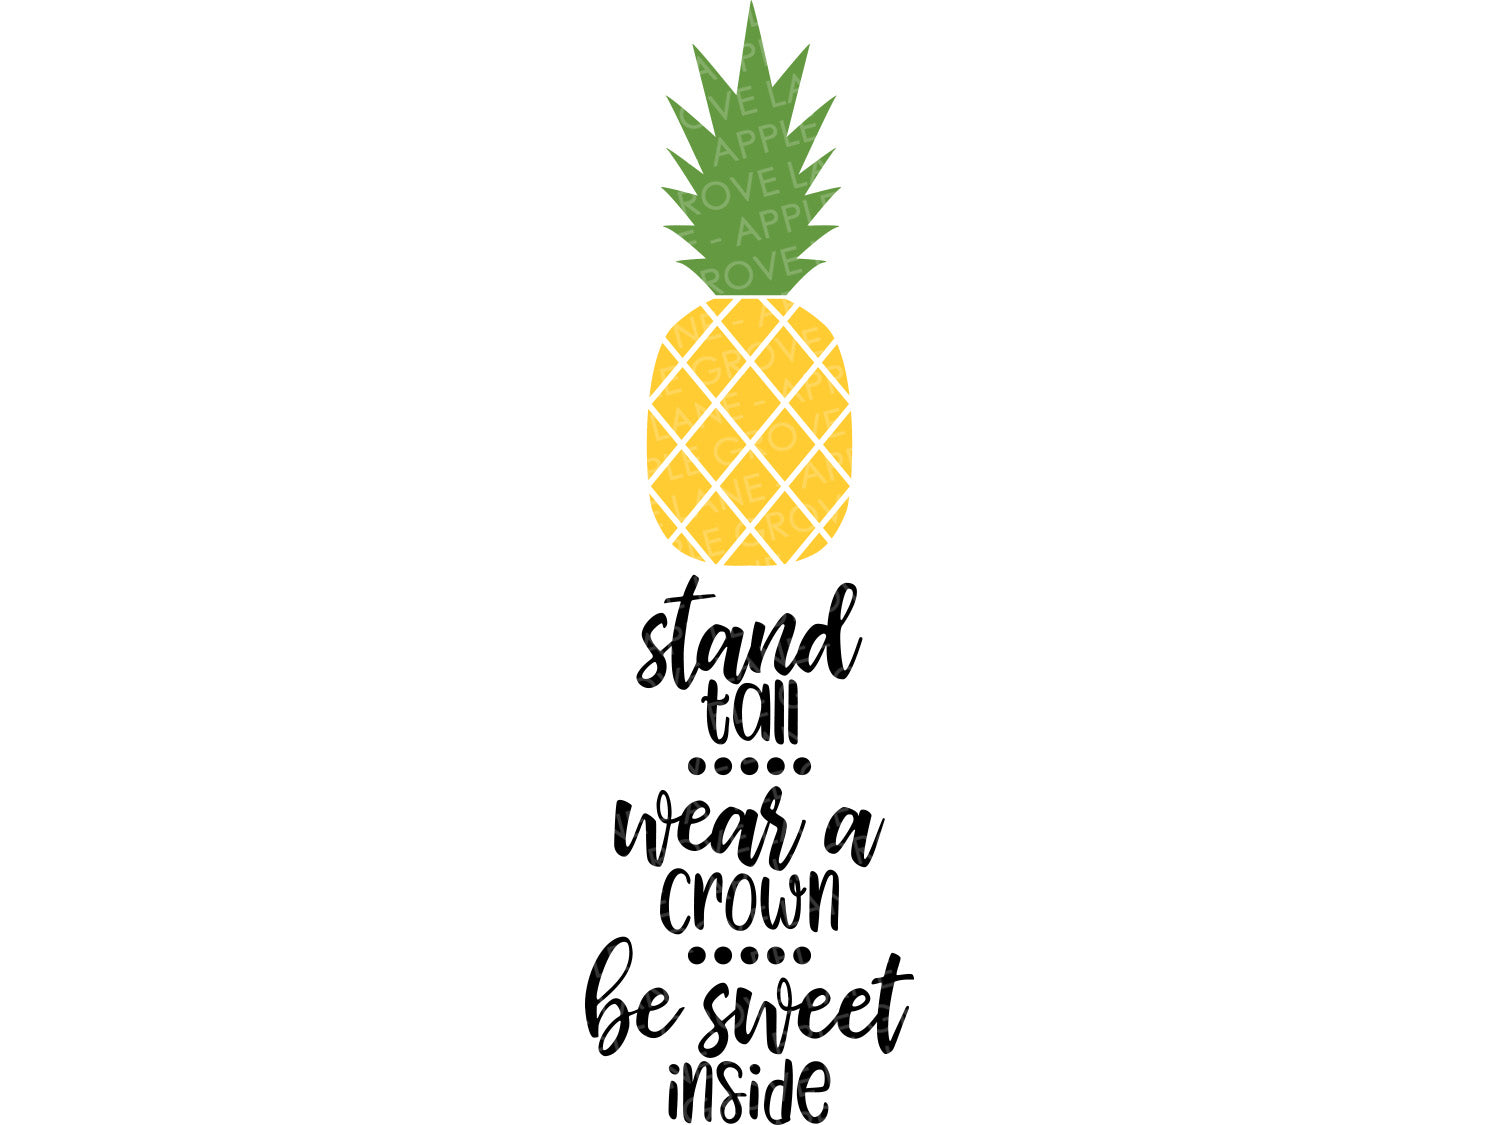 Pineapple Svg - Stand Tall Svg - Stand Tall Pineapple Svg - Hawaiian Svg - Tropical Svg - Hawaii Svg - Summer Svg - Hawaii Pineapple Svg